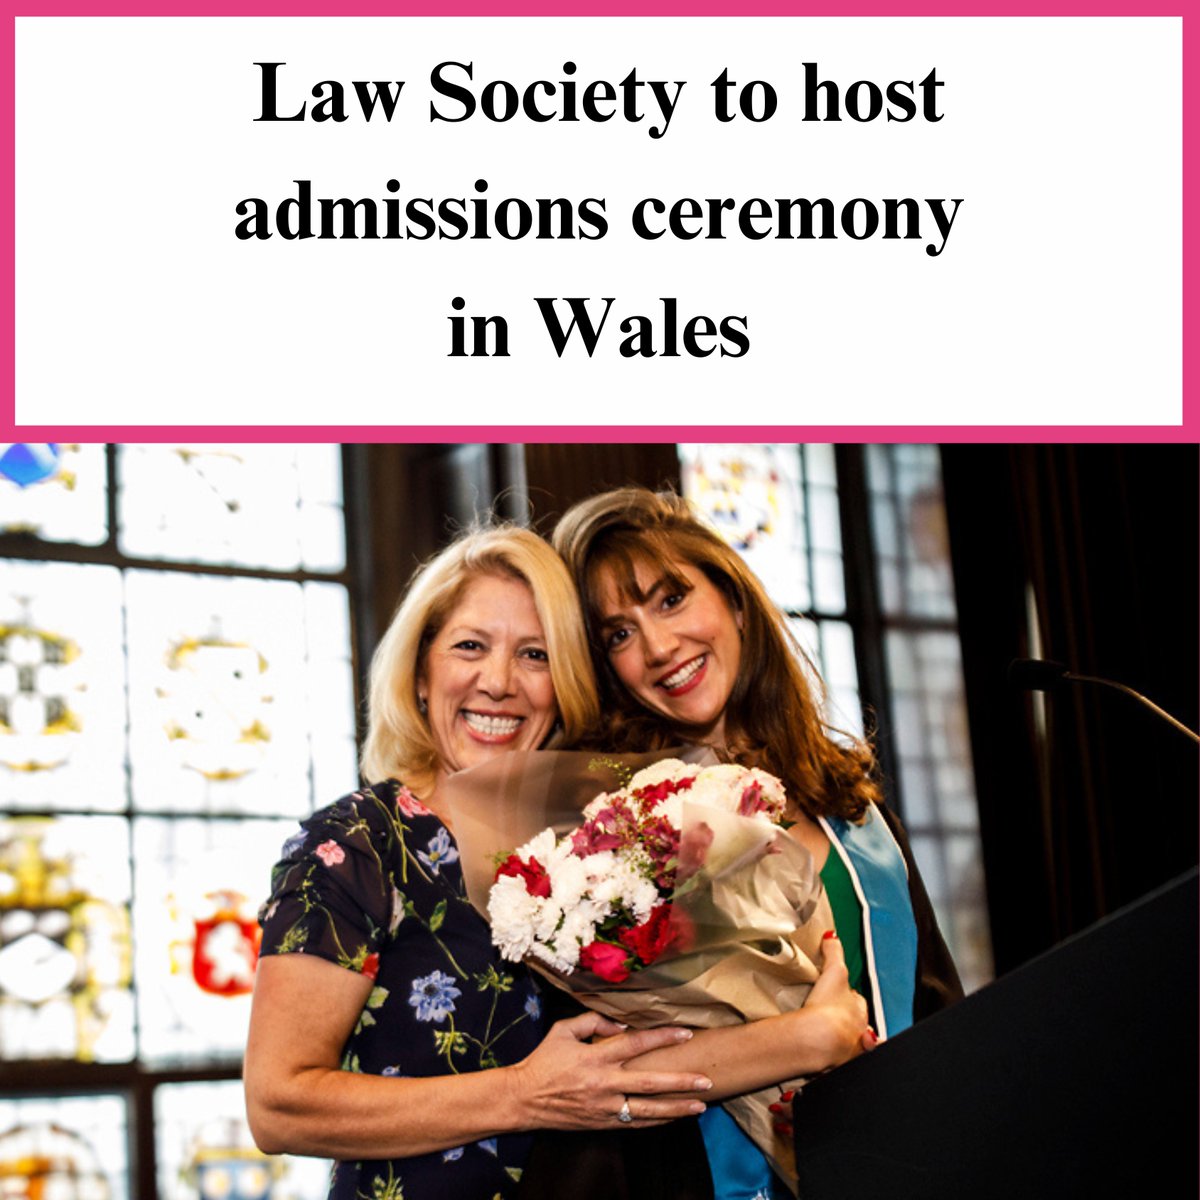 Coming to Wales on 12 July – we’re bringing another admissions ceremony to you! 🎓 Taking place at the Royal Welsh College of Music and Drama, we’re excited to bring our admissions ceremony to Wales 🏴󠁧󠁢󠁷󠁬󠁳󠁿 Whether you qualified recently or are already established, it’s never too…